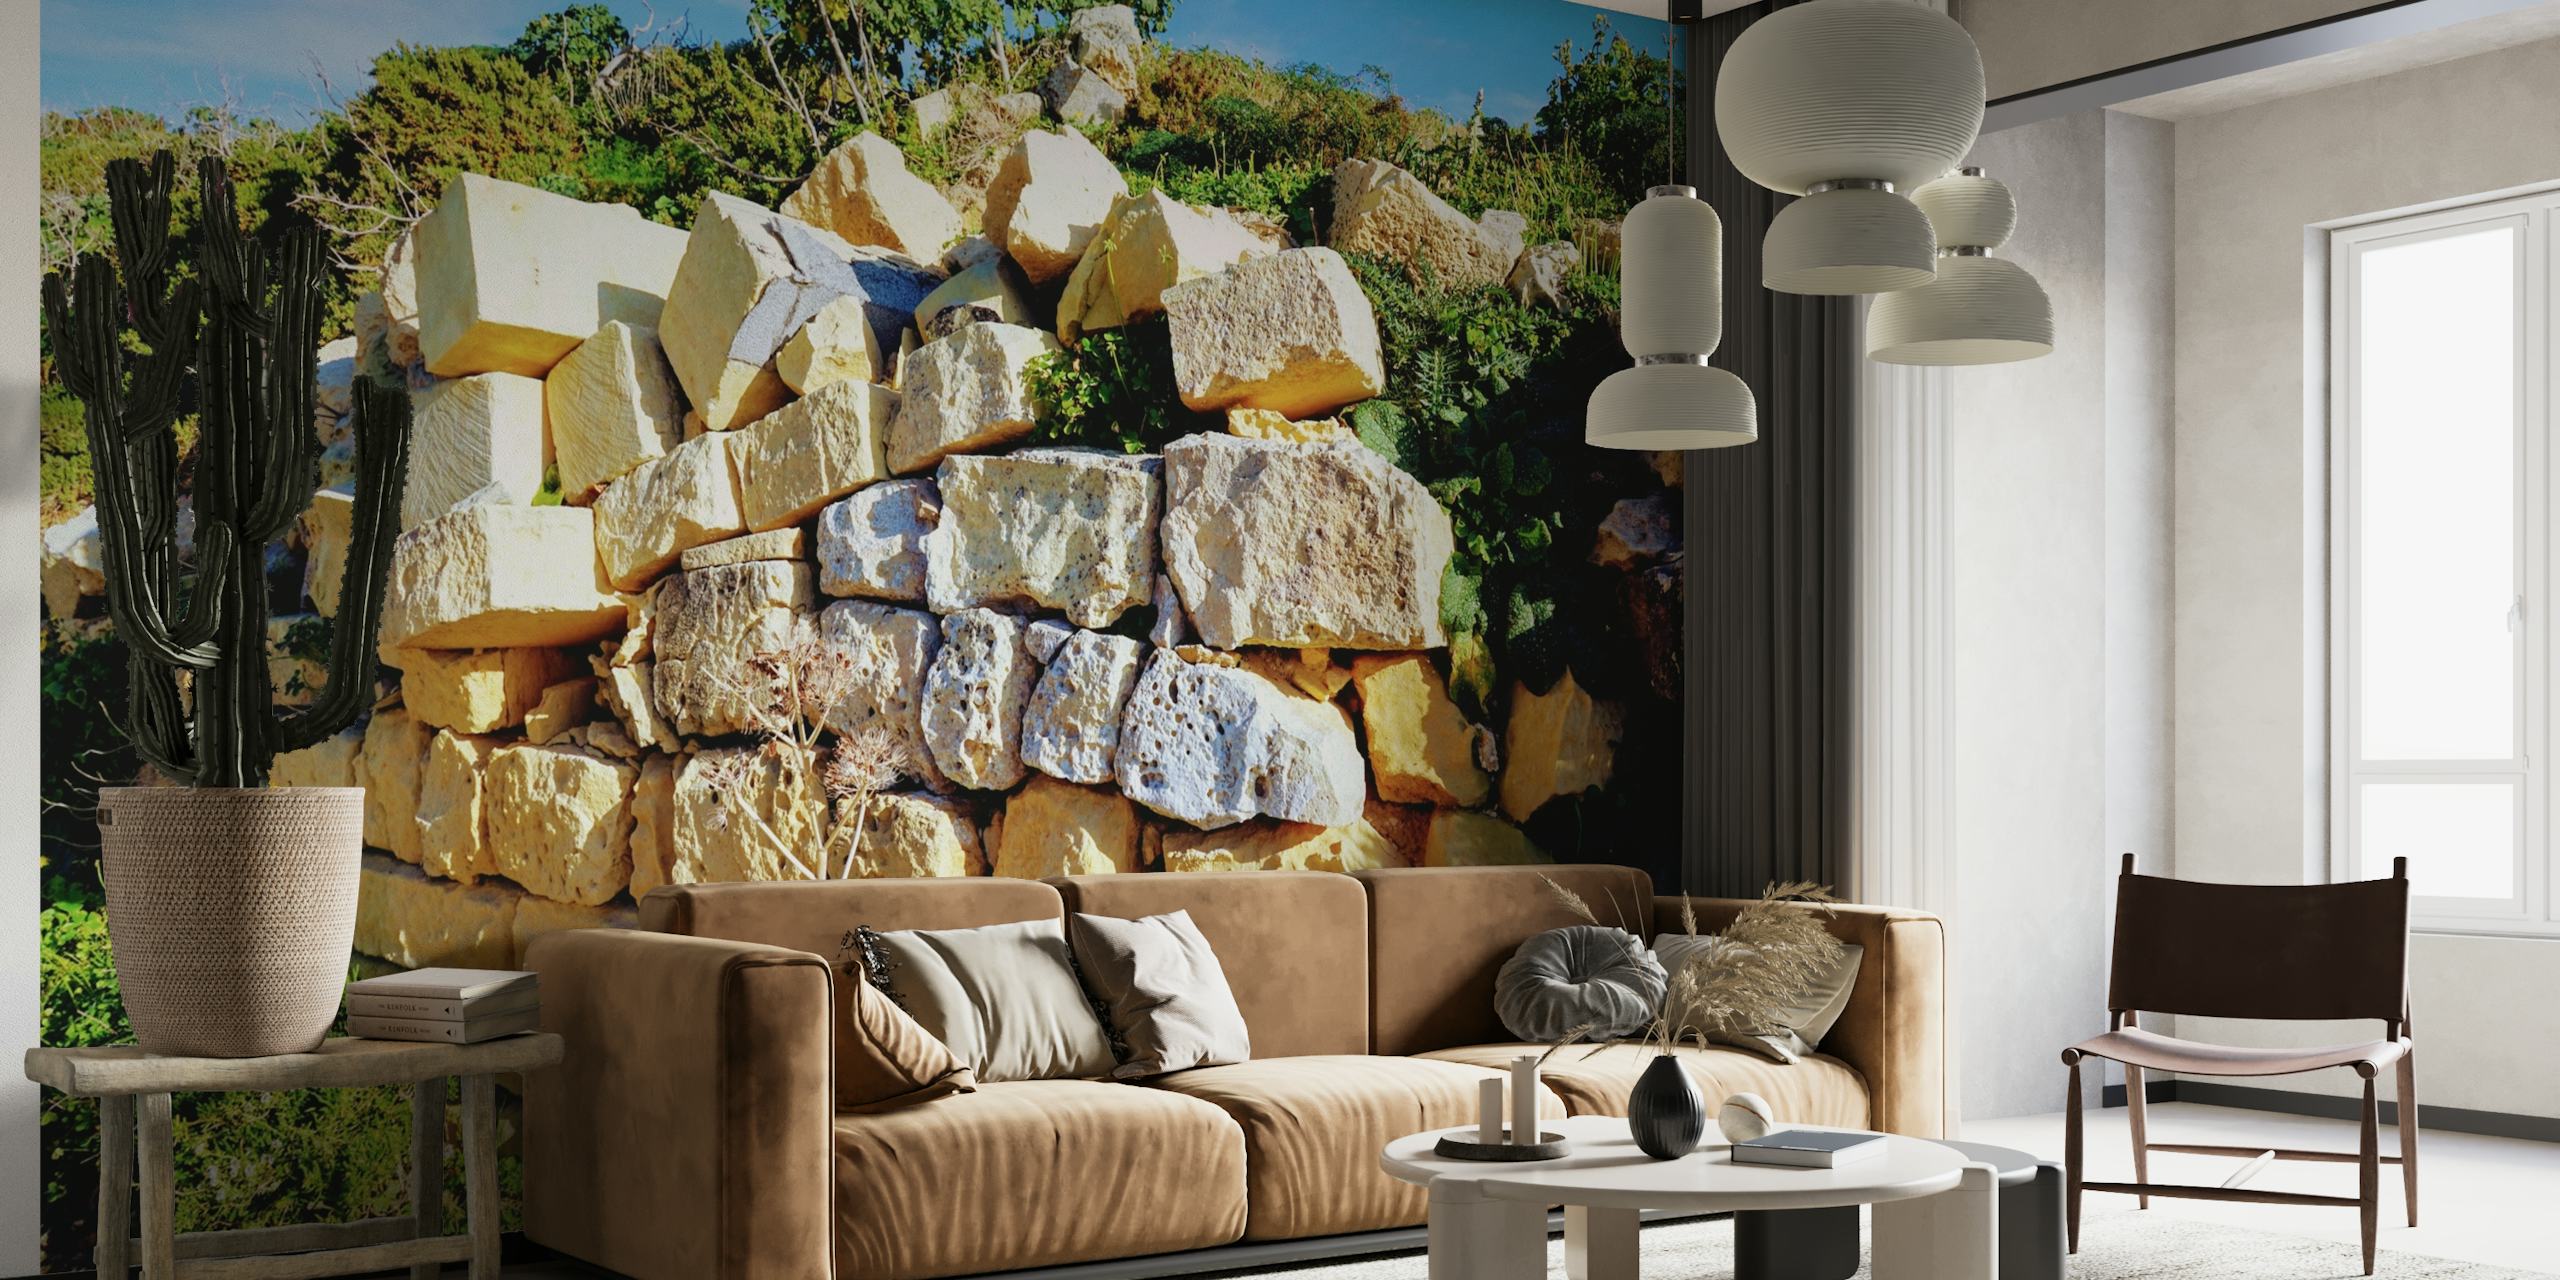 Sunlit Stones wall mural featuring a warm, golden-hued stone wall bathed in sunlight